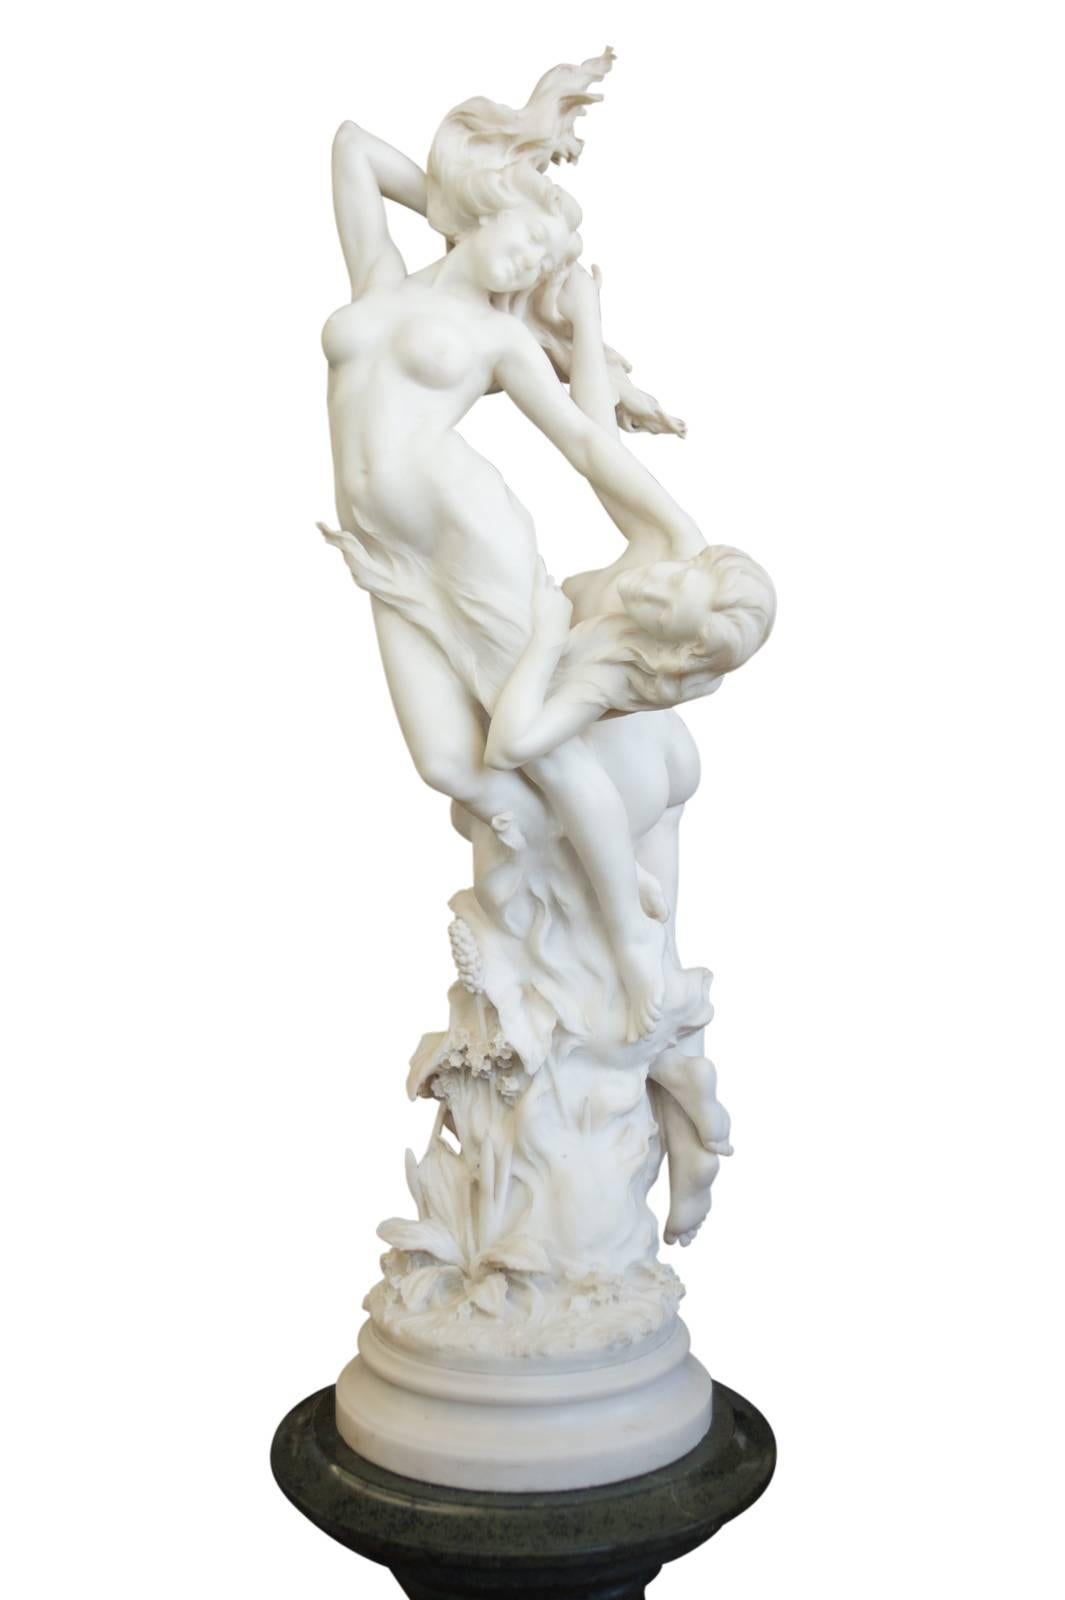 Hand-Carved Superb Italian Marble group of Two Intertwined Ladies by Vittorio Caradossi